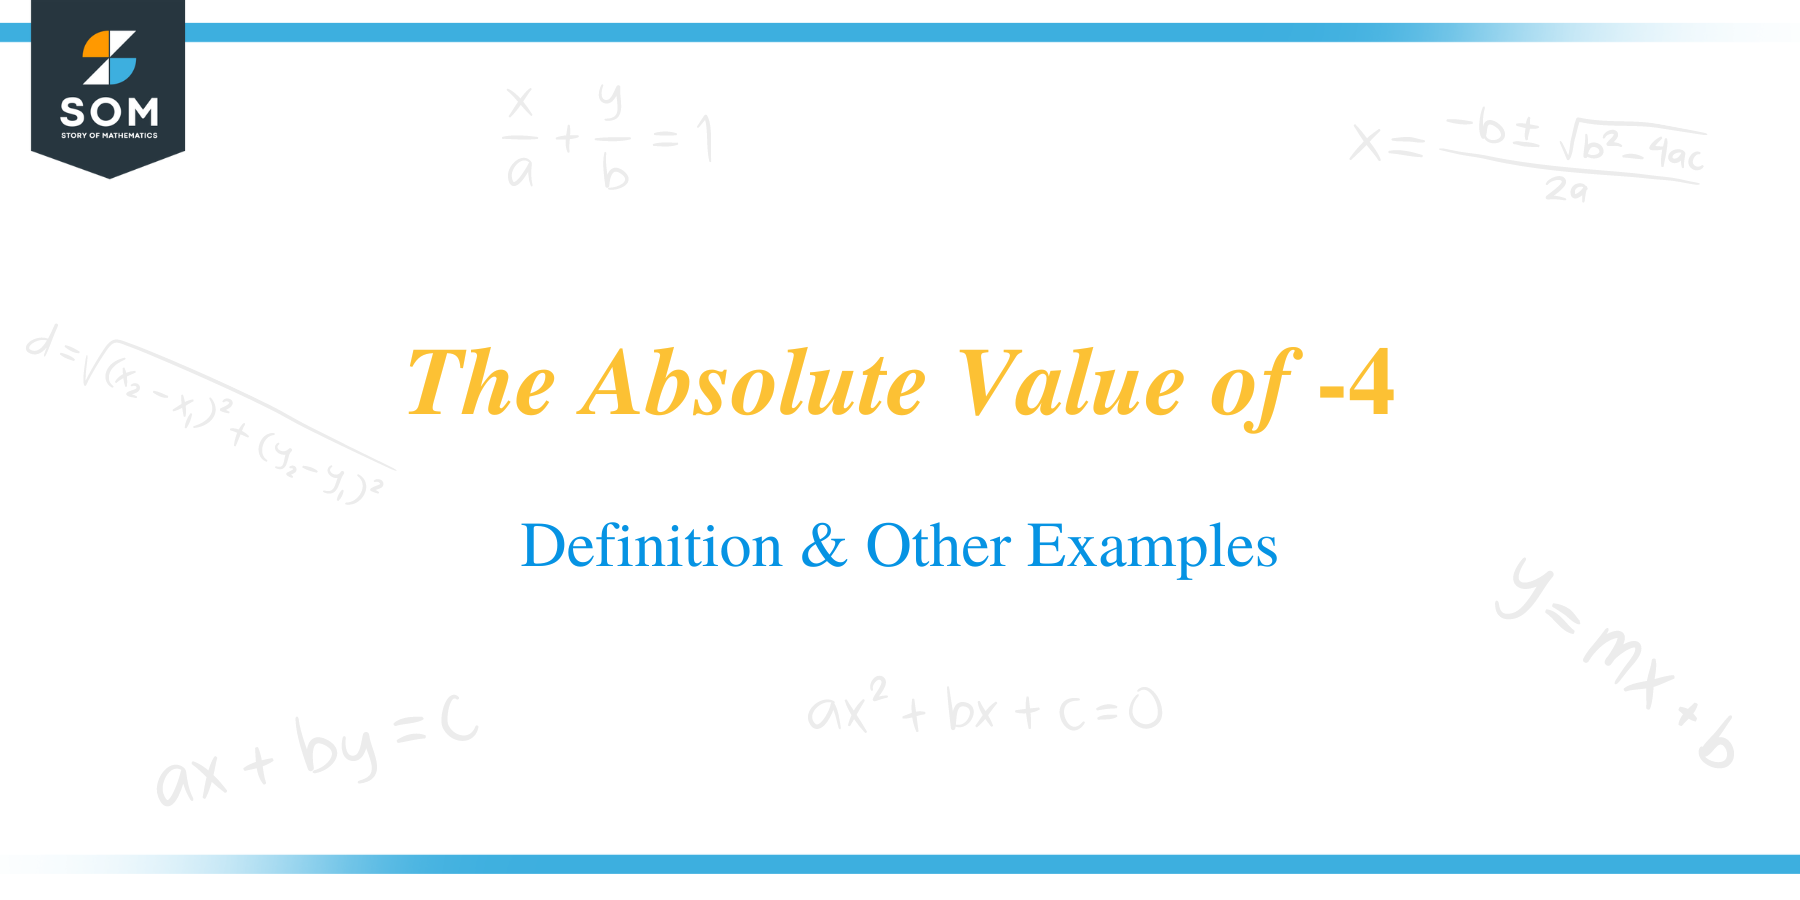 The Absolute Value of 4